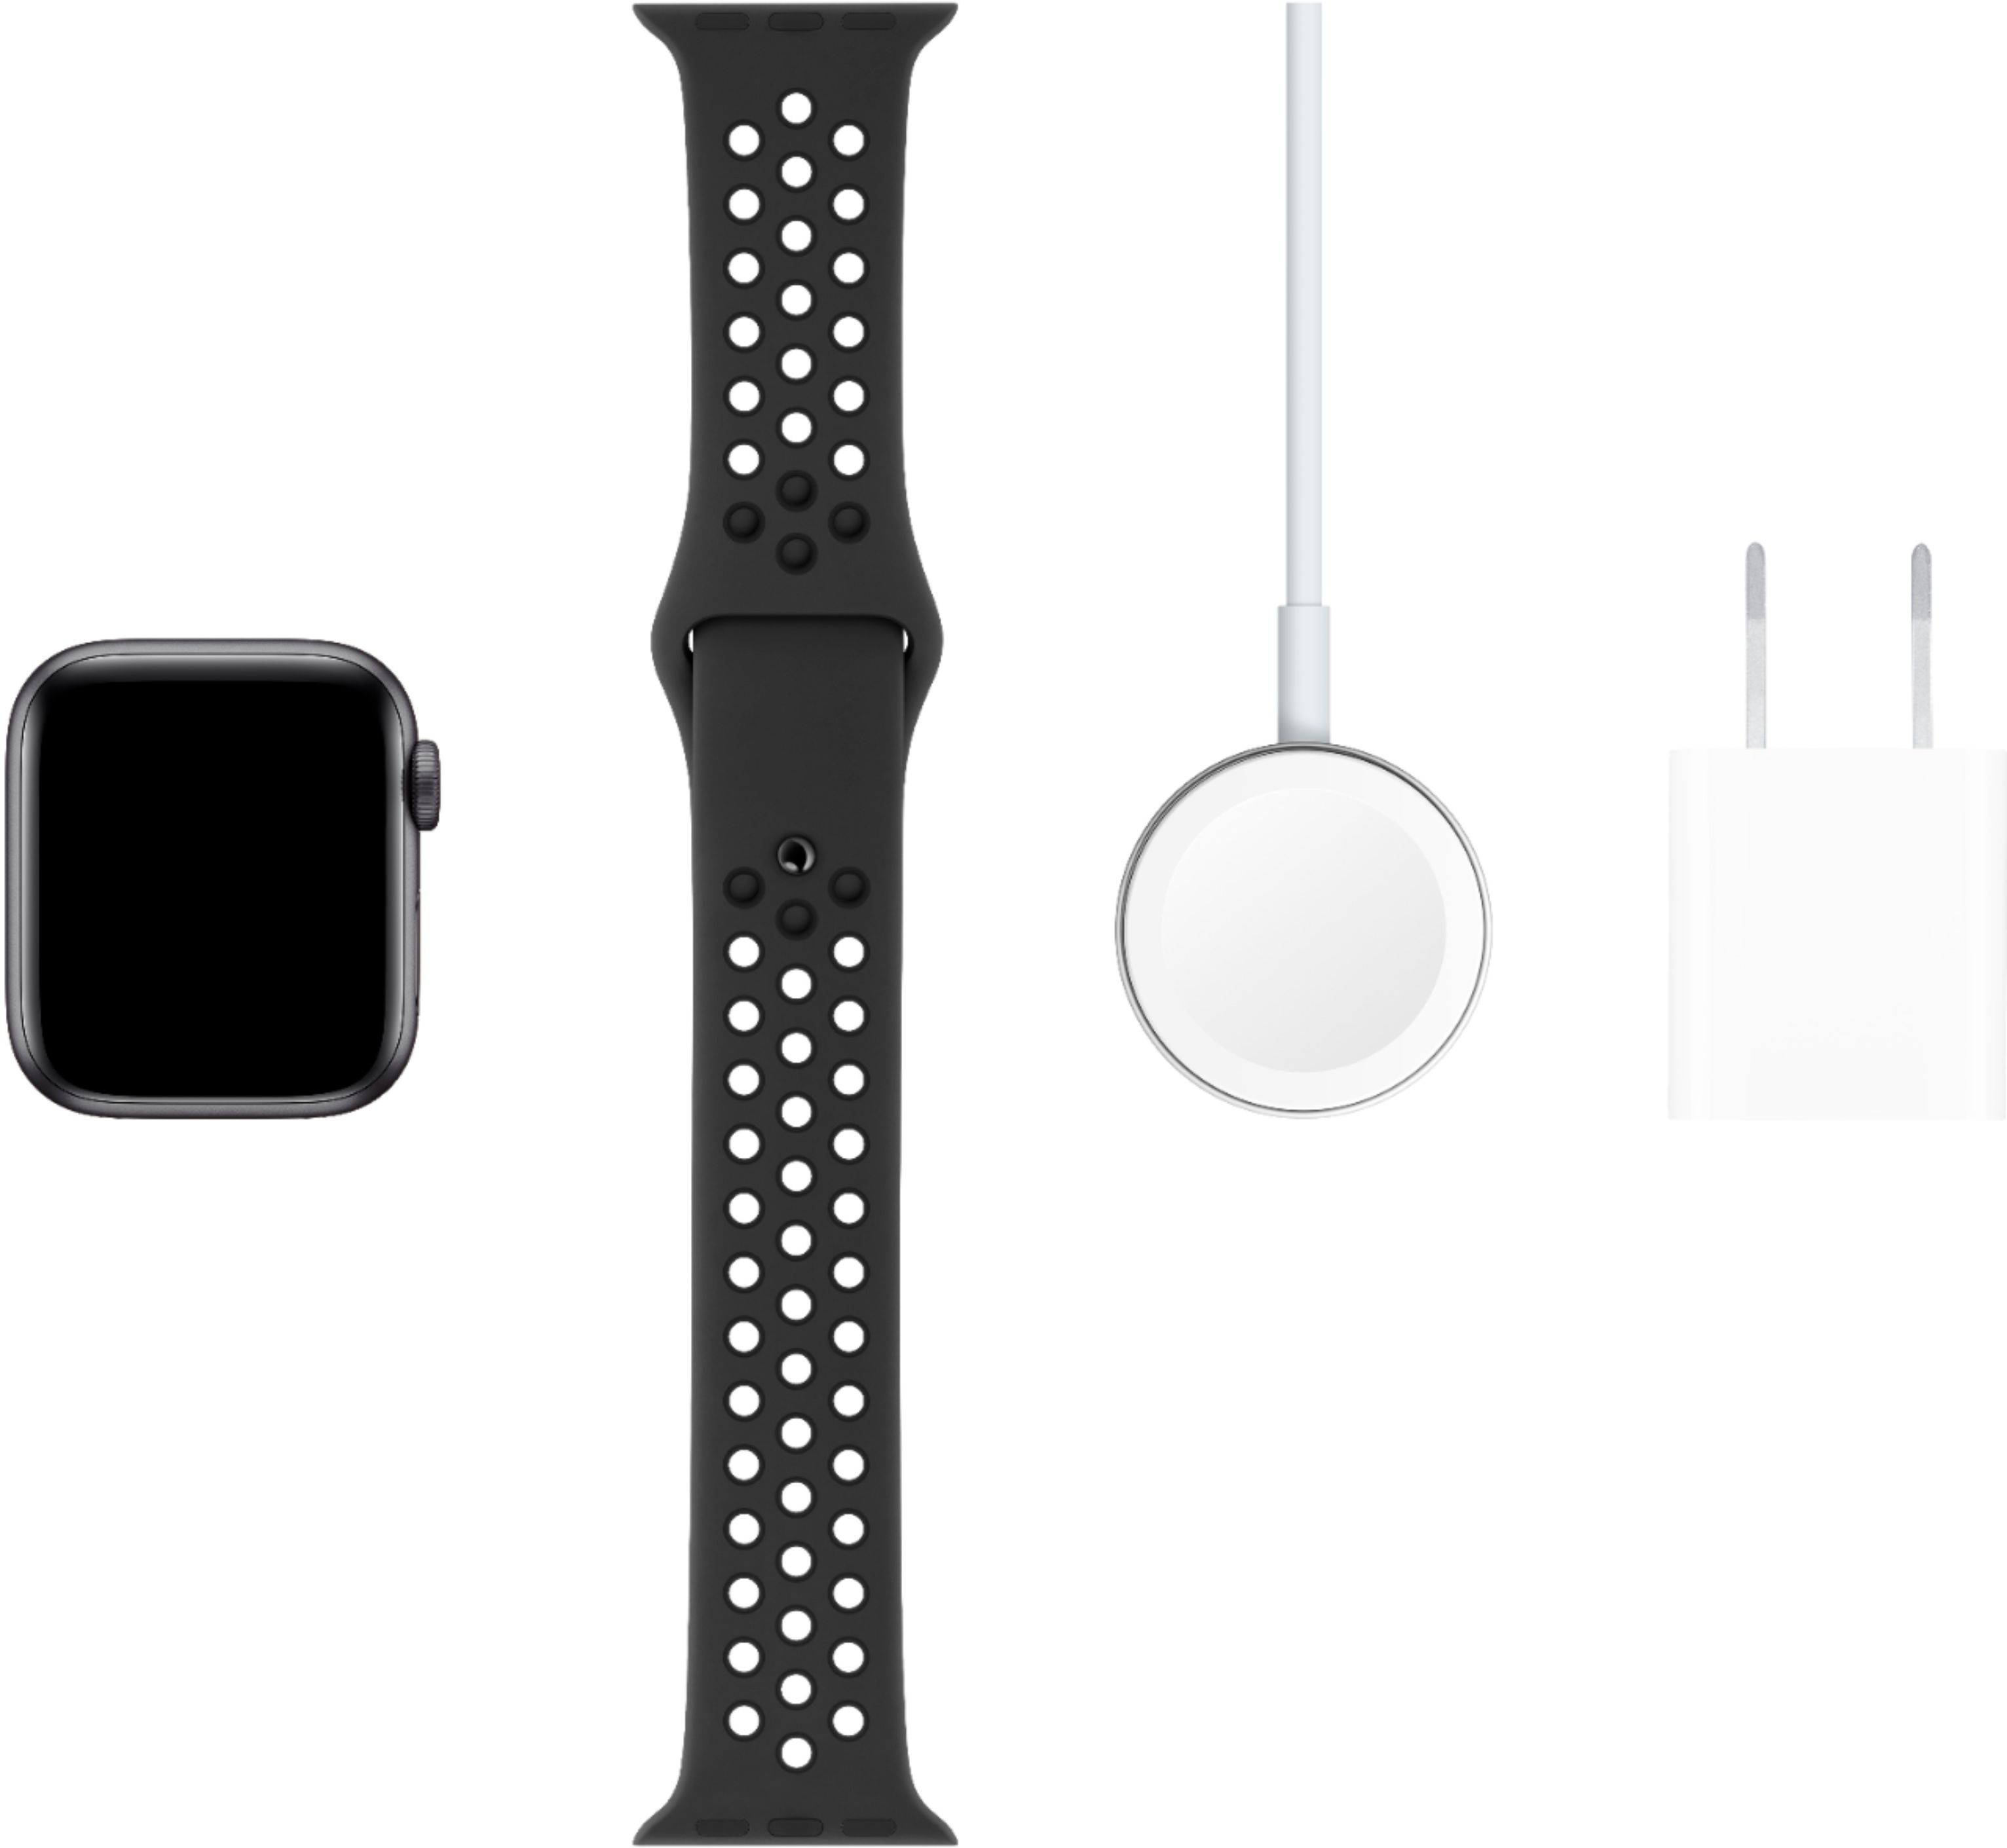 Apple Watch Nike Series 5 (GPS + Cellular) Space Gray Aluminum with Anthracite/Black Nike Sport Band Space Gray Aluminum (AT&T) MX382LL/A - Best Buy